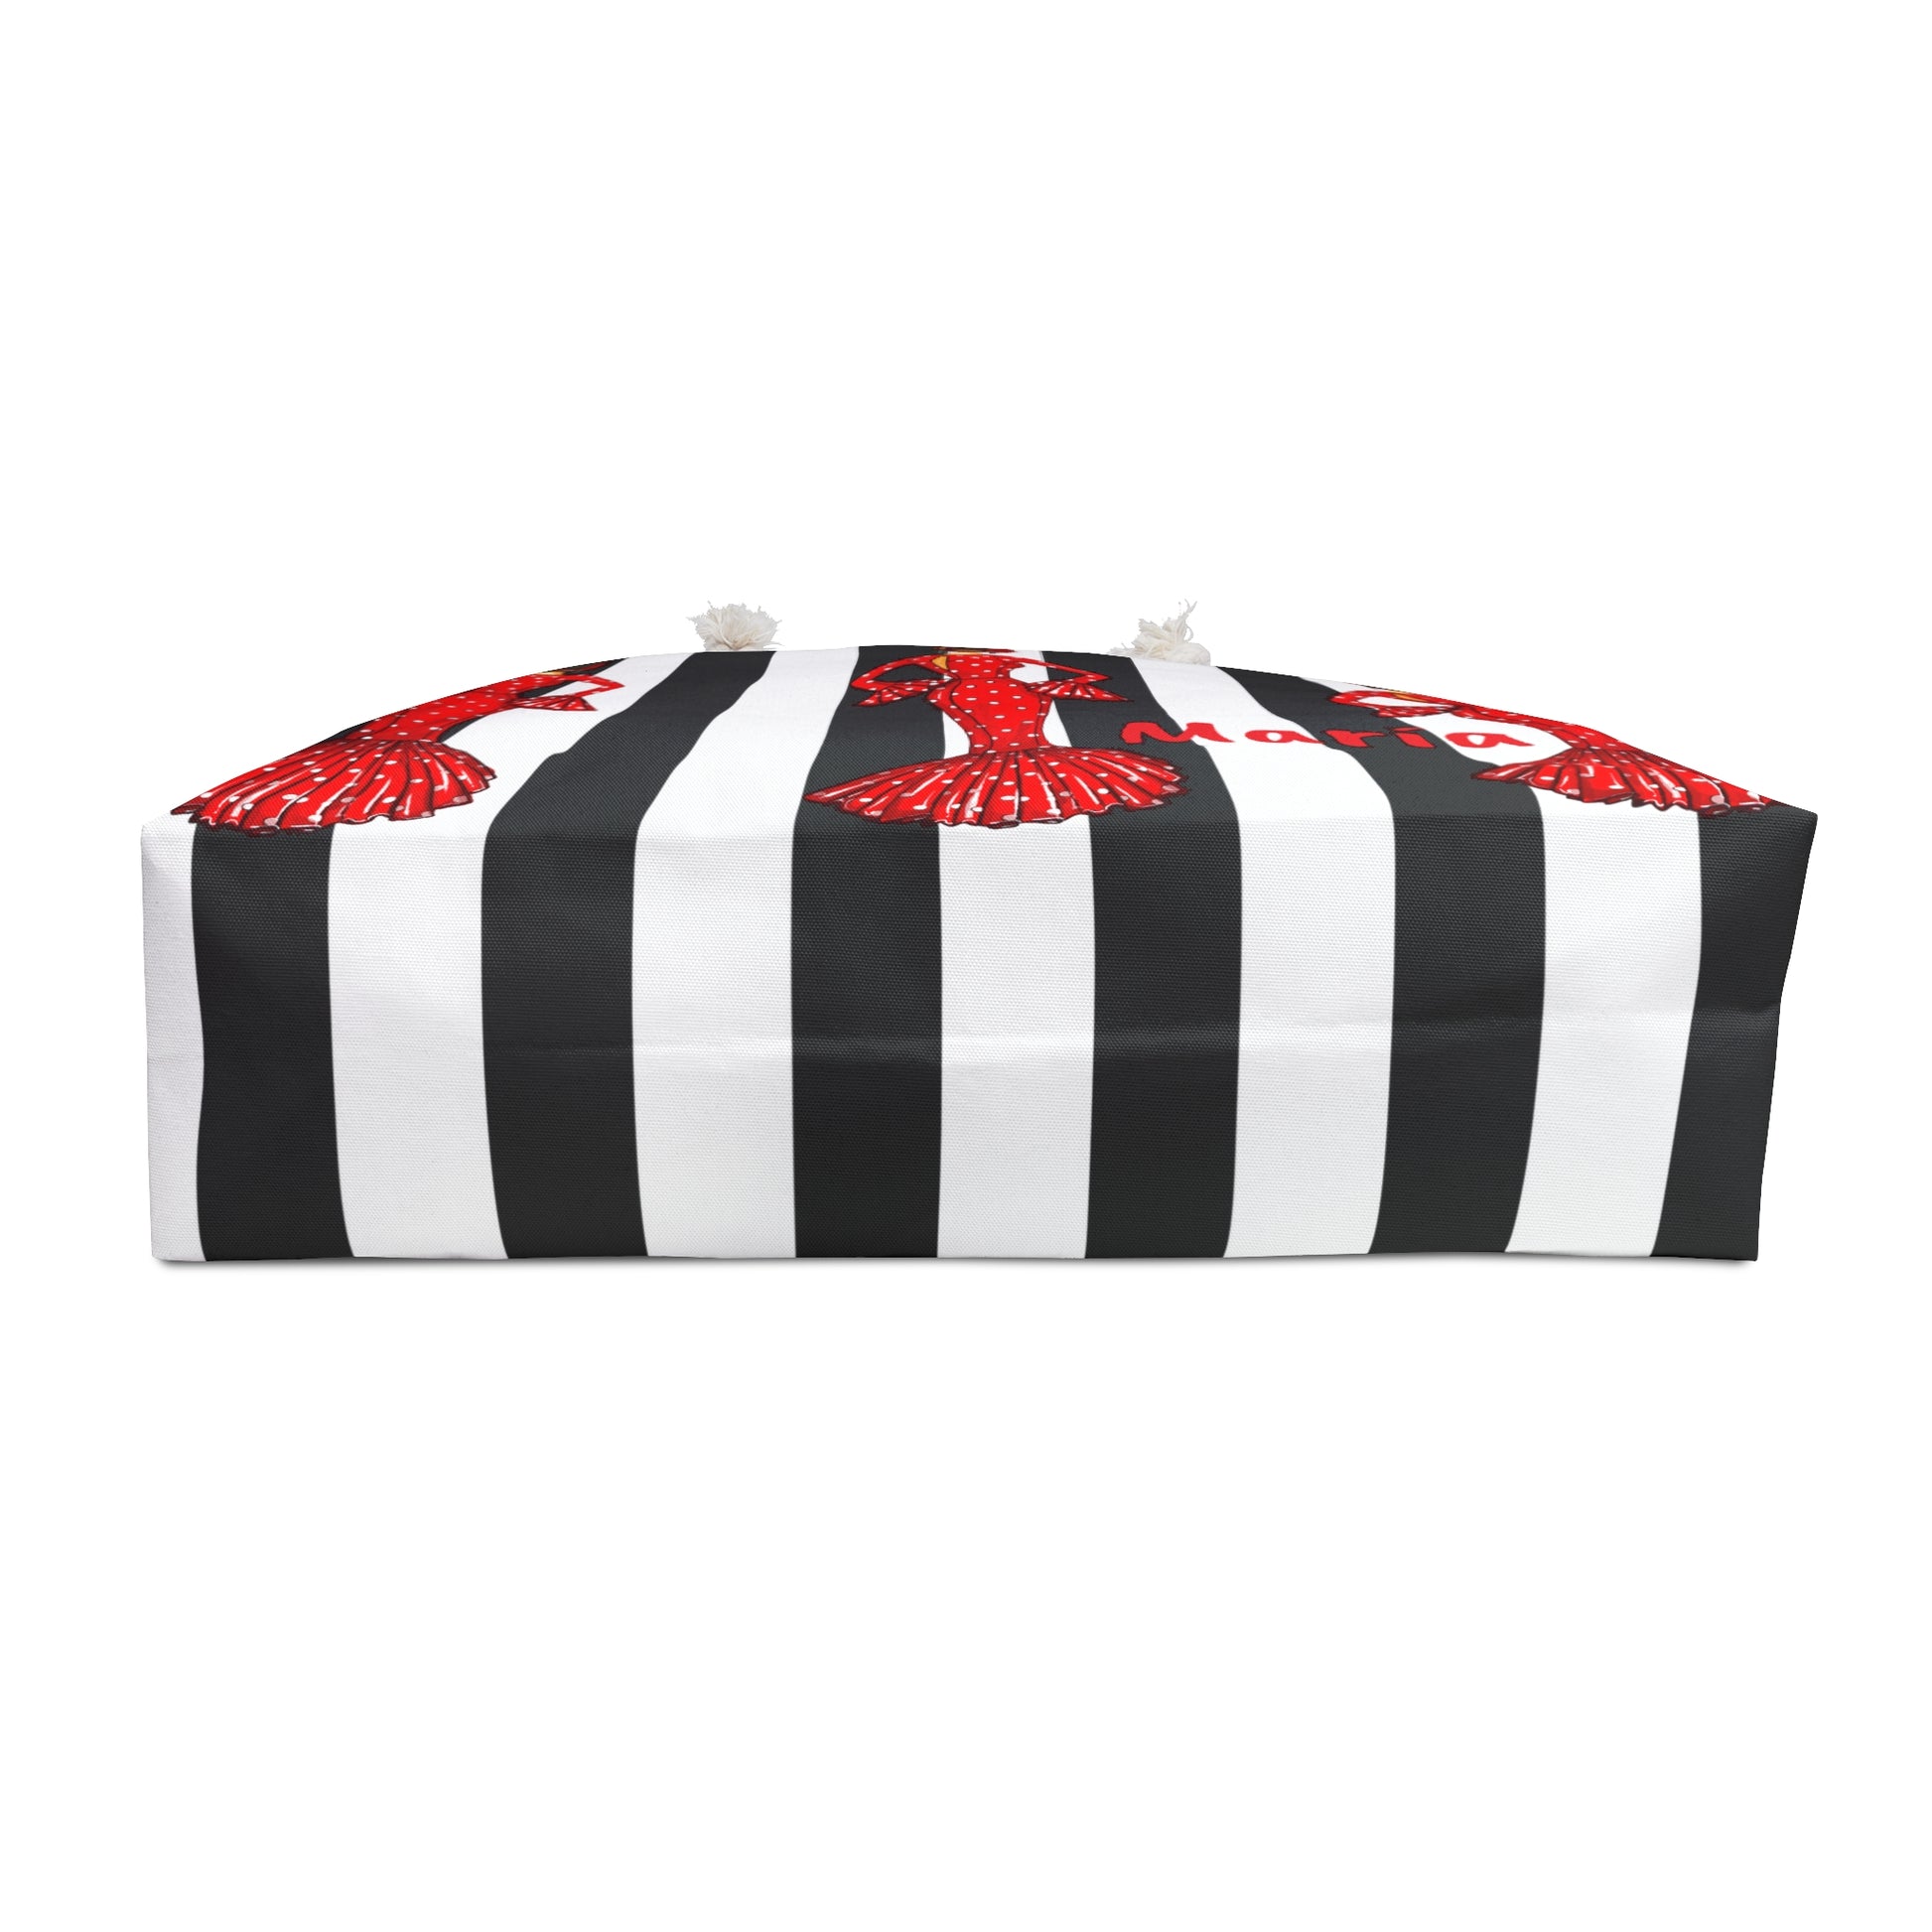 a black and white striped bag with red flowers on it